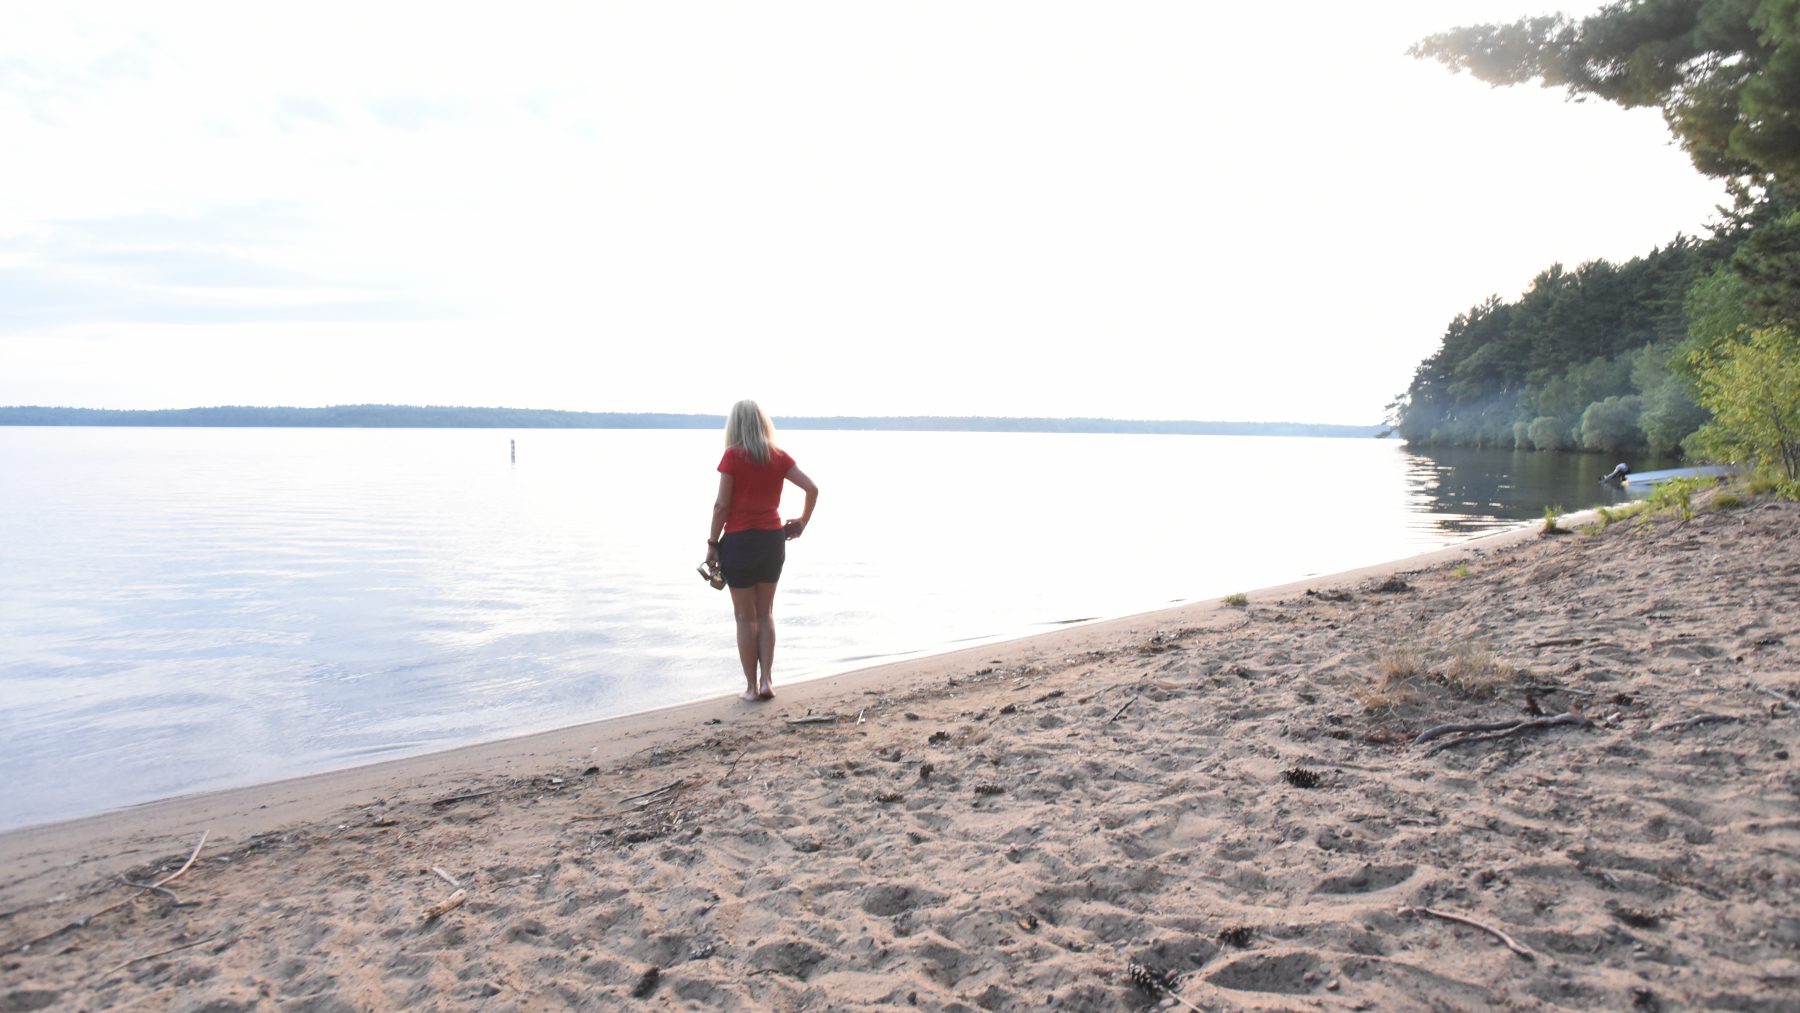 Article: Soak in summer at these Northwoods beaches